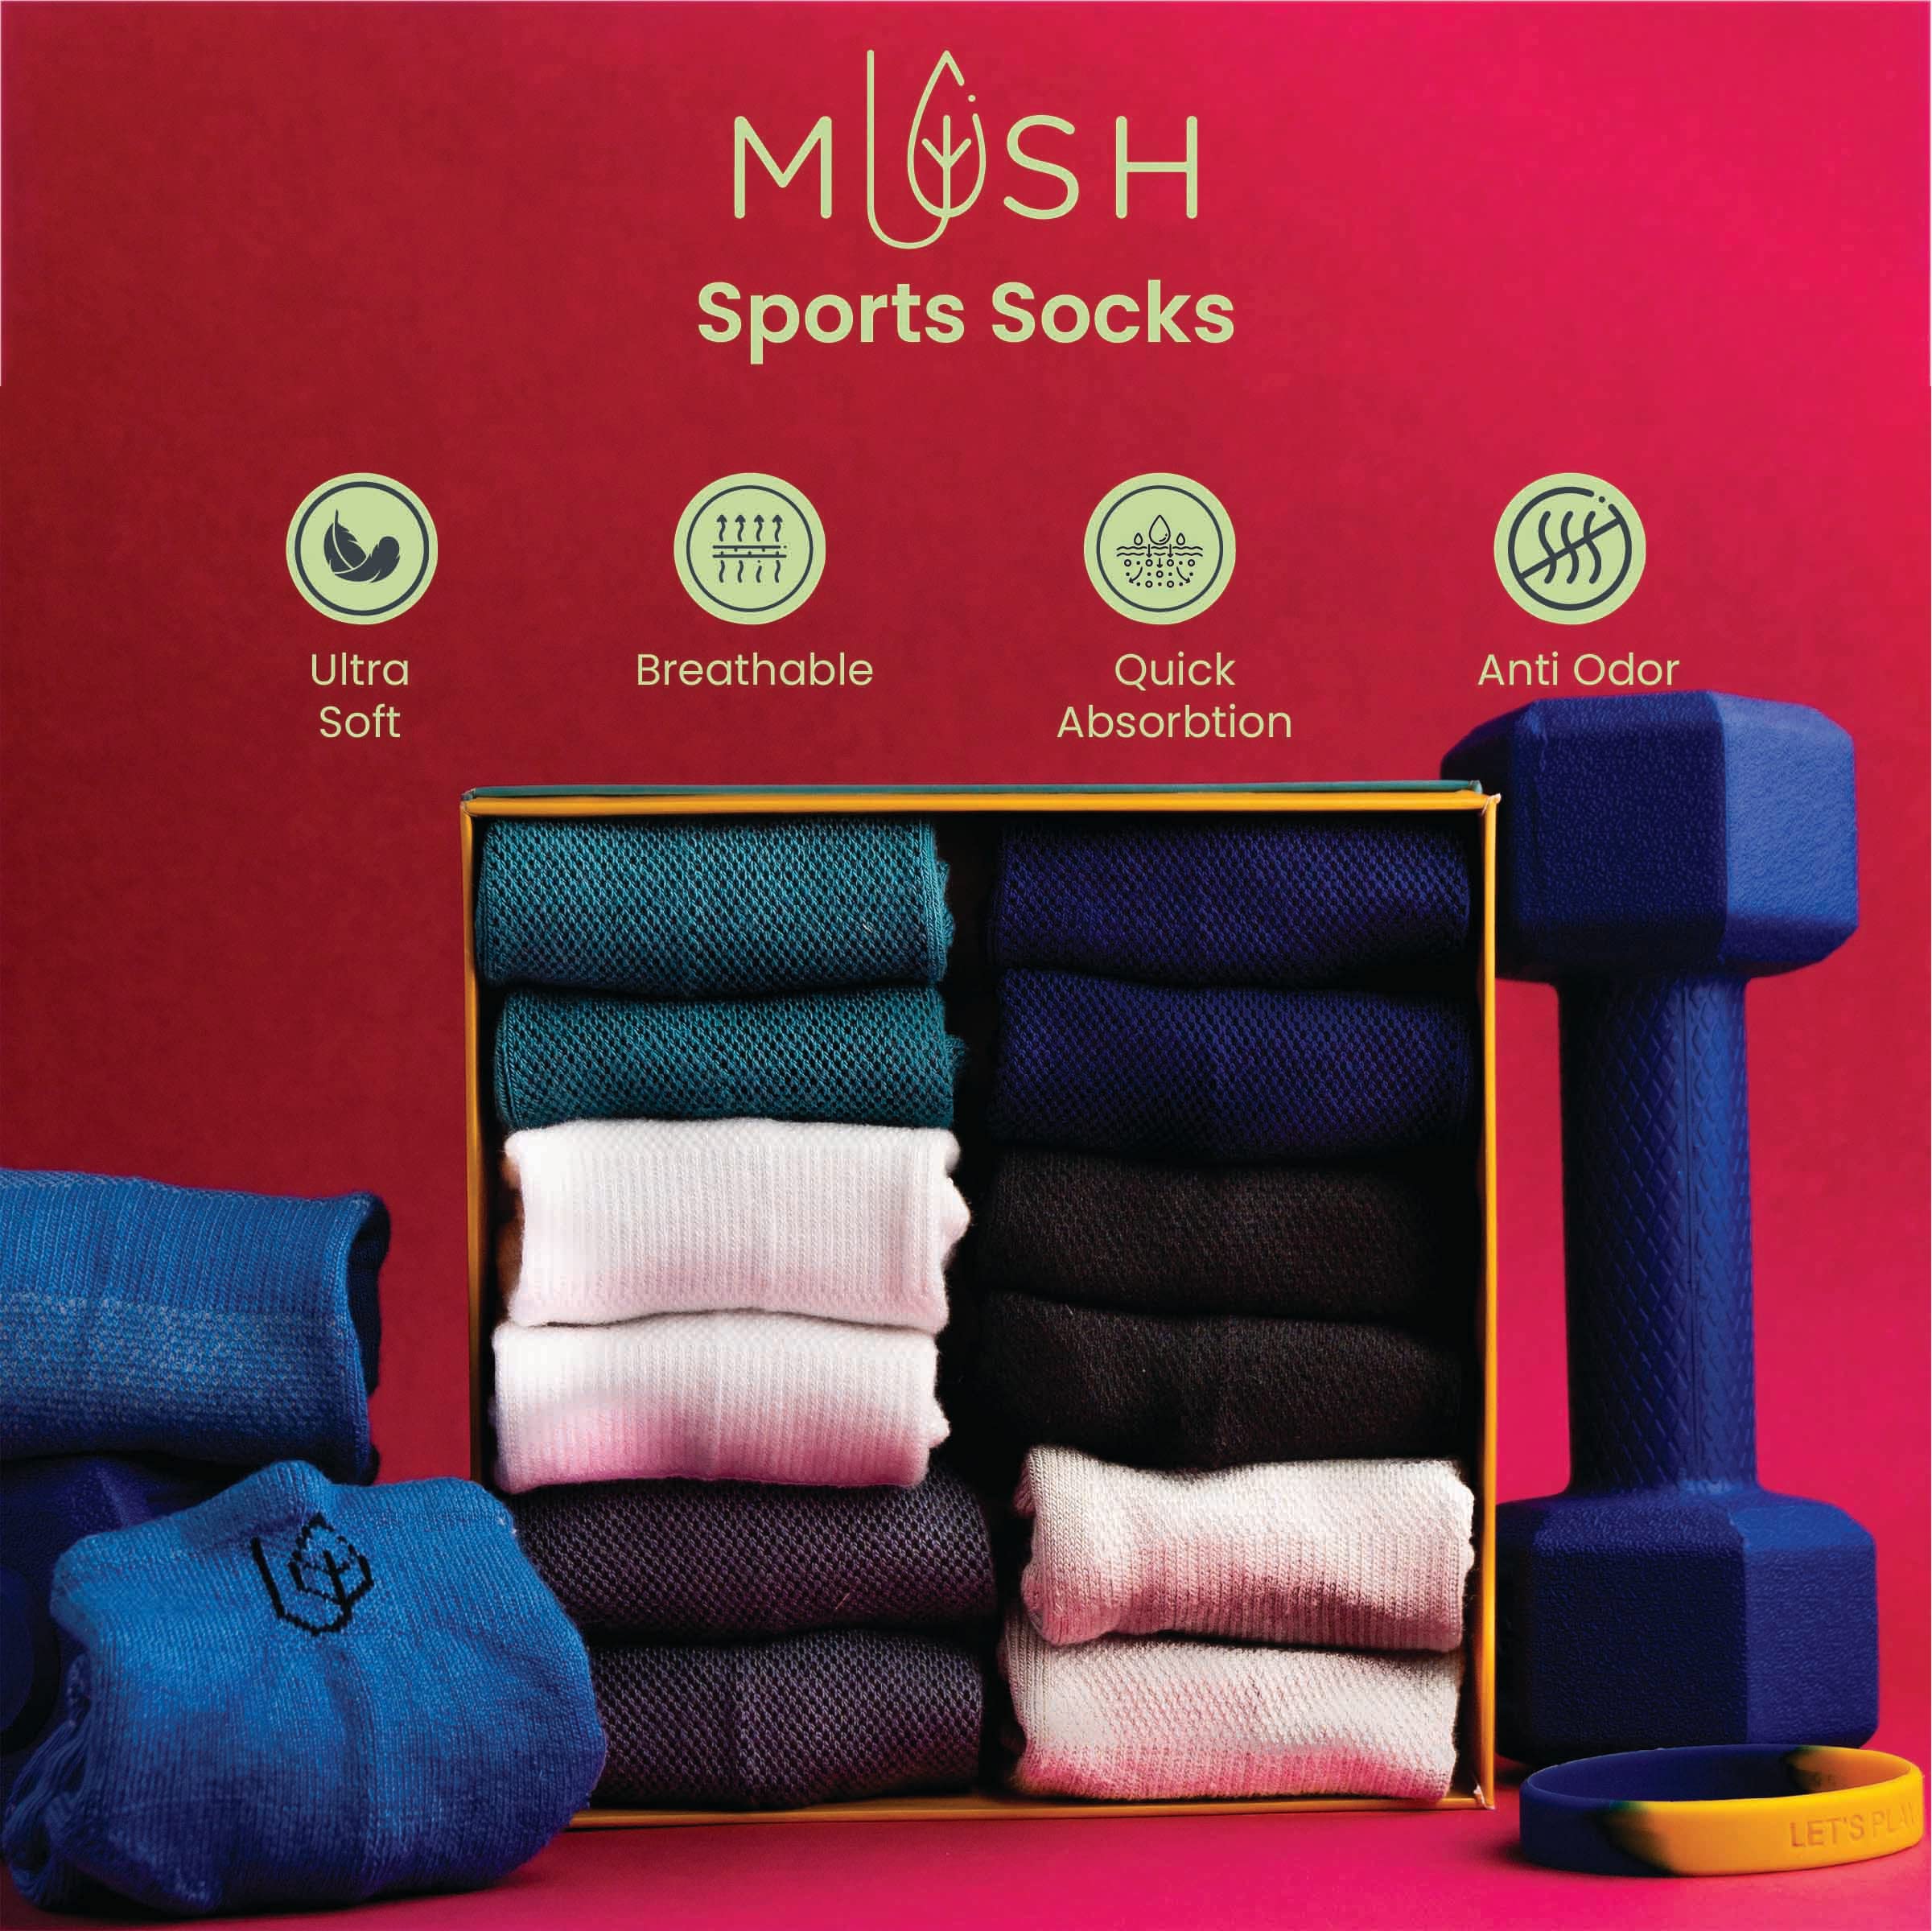 Mush Bamboo Ankle Socks for Women || Ultra Soft, Anti Odor and Anti Blister Design || For Casual Wear, Sports, Running, & Gym use || Free Size (Pack of 3)